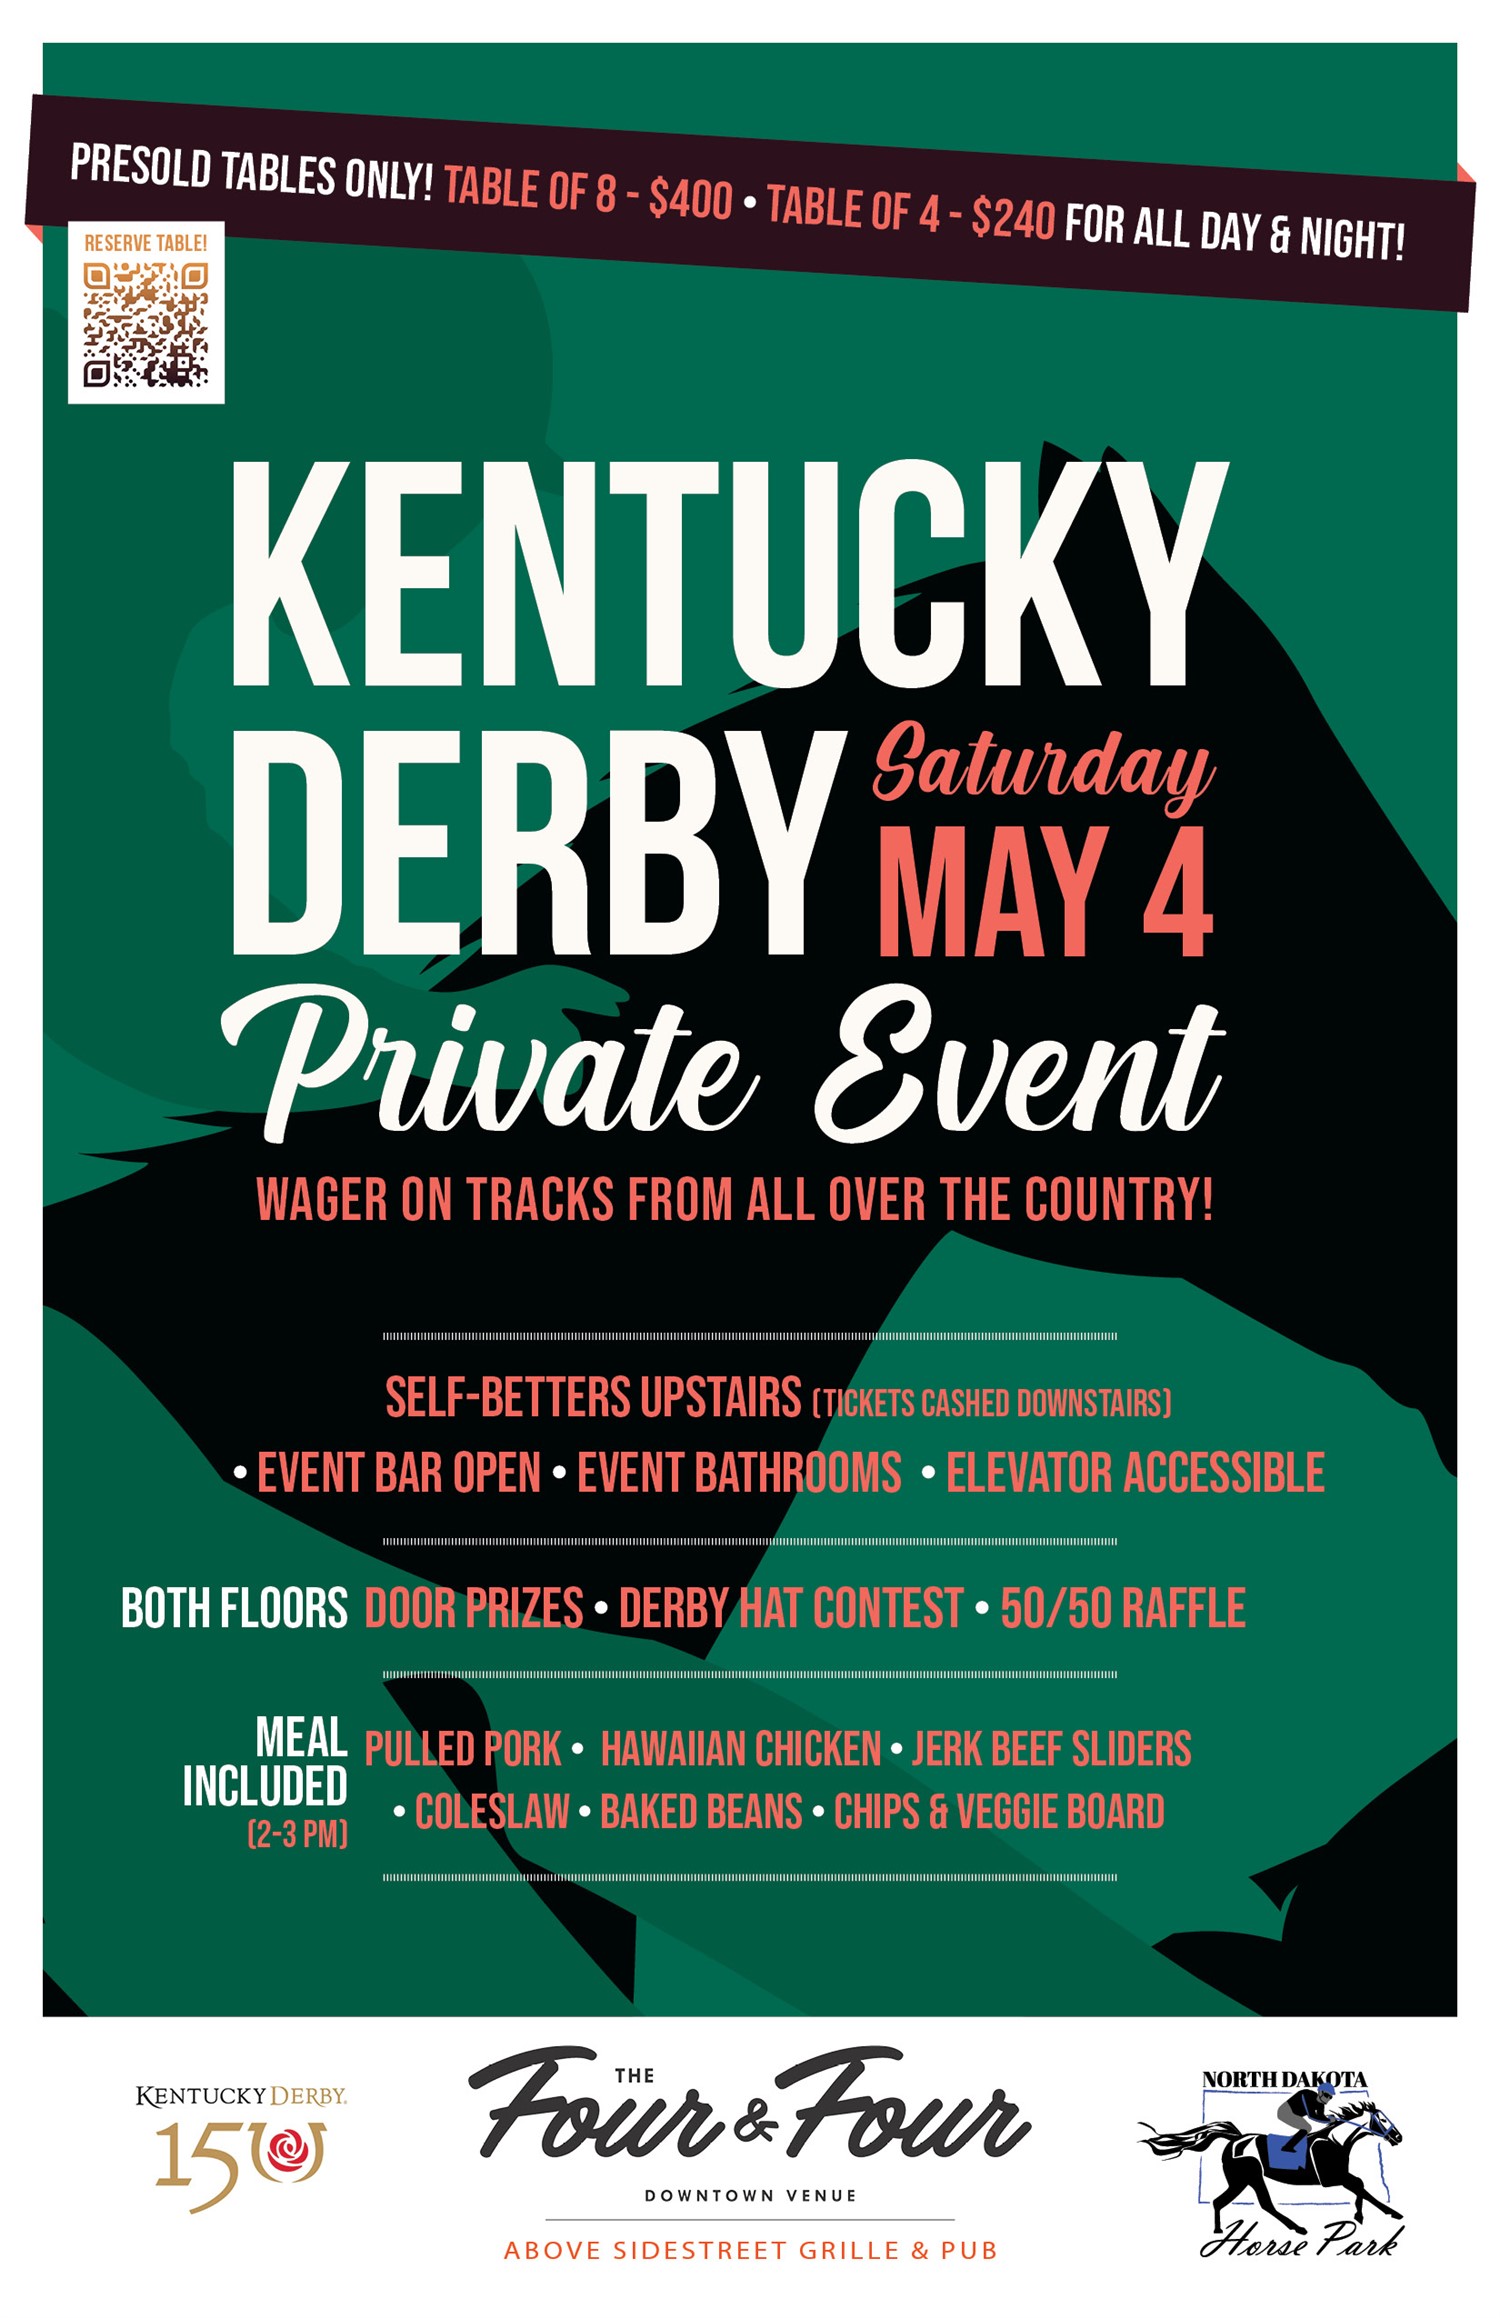 Kentucky Derby Private Event  on may. 04, 10:00@The Four and Four, above Sidestreet Grille & Bar - Compra entradas y obtén información enSidestreet Live / Four and Four 